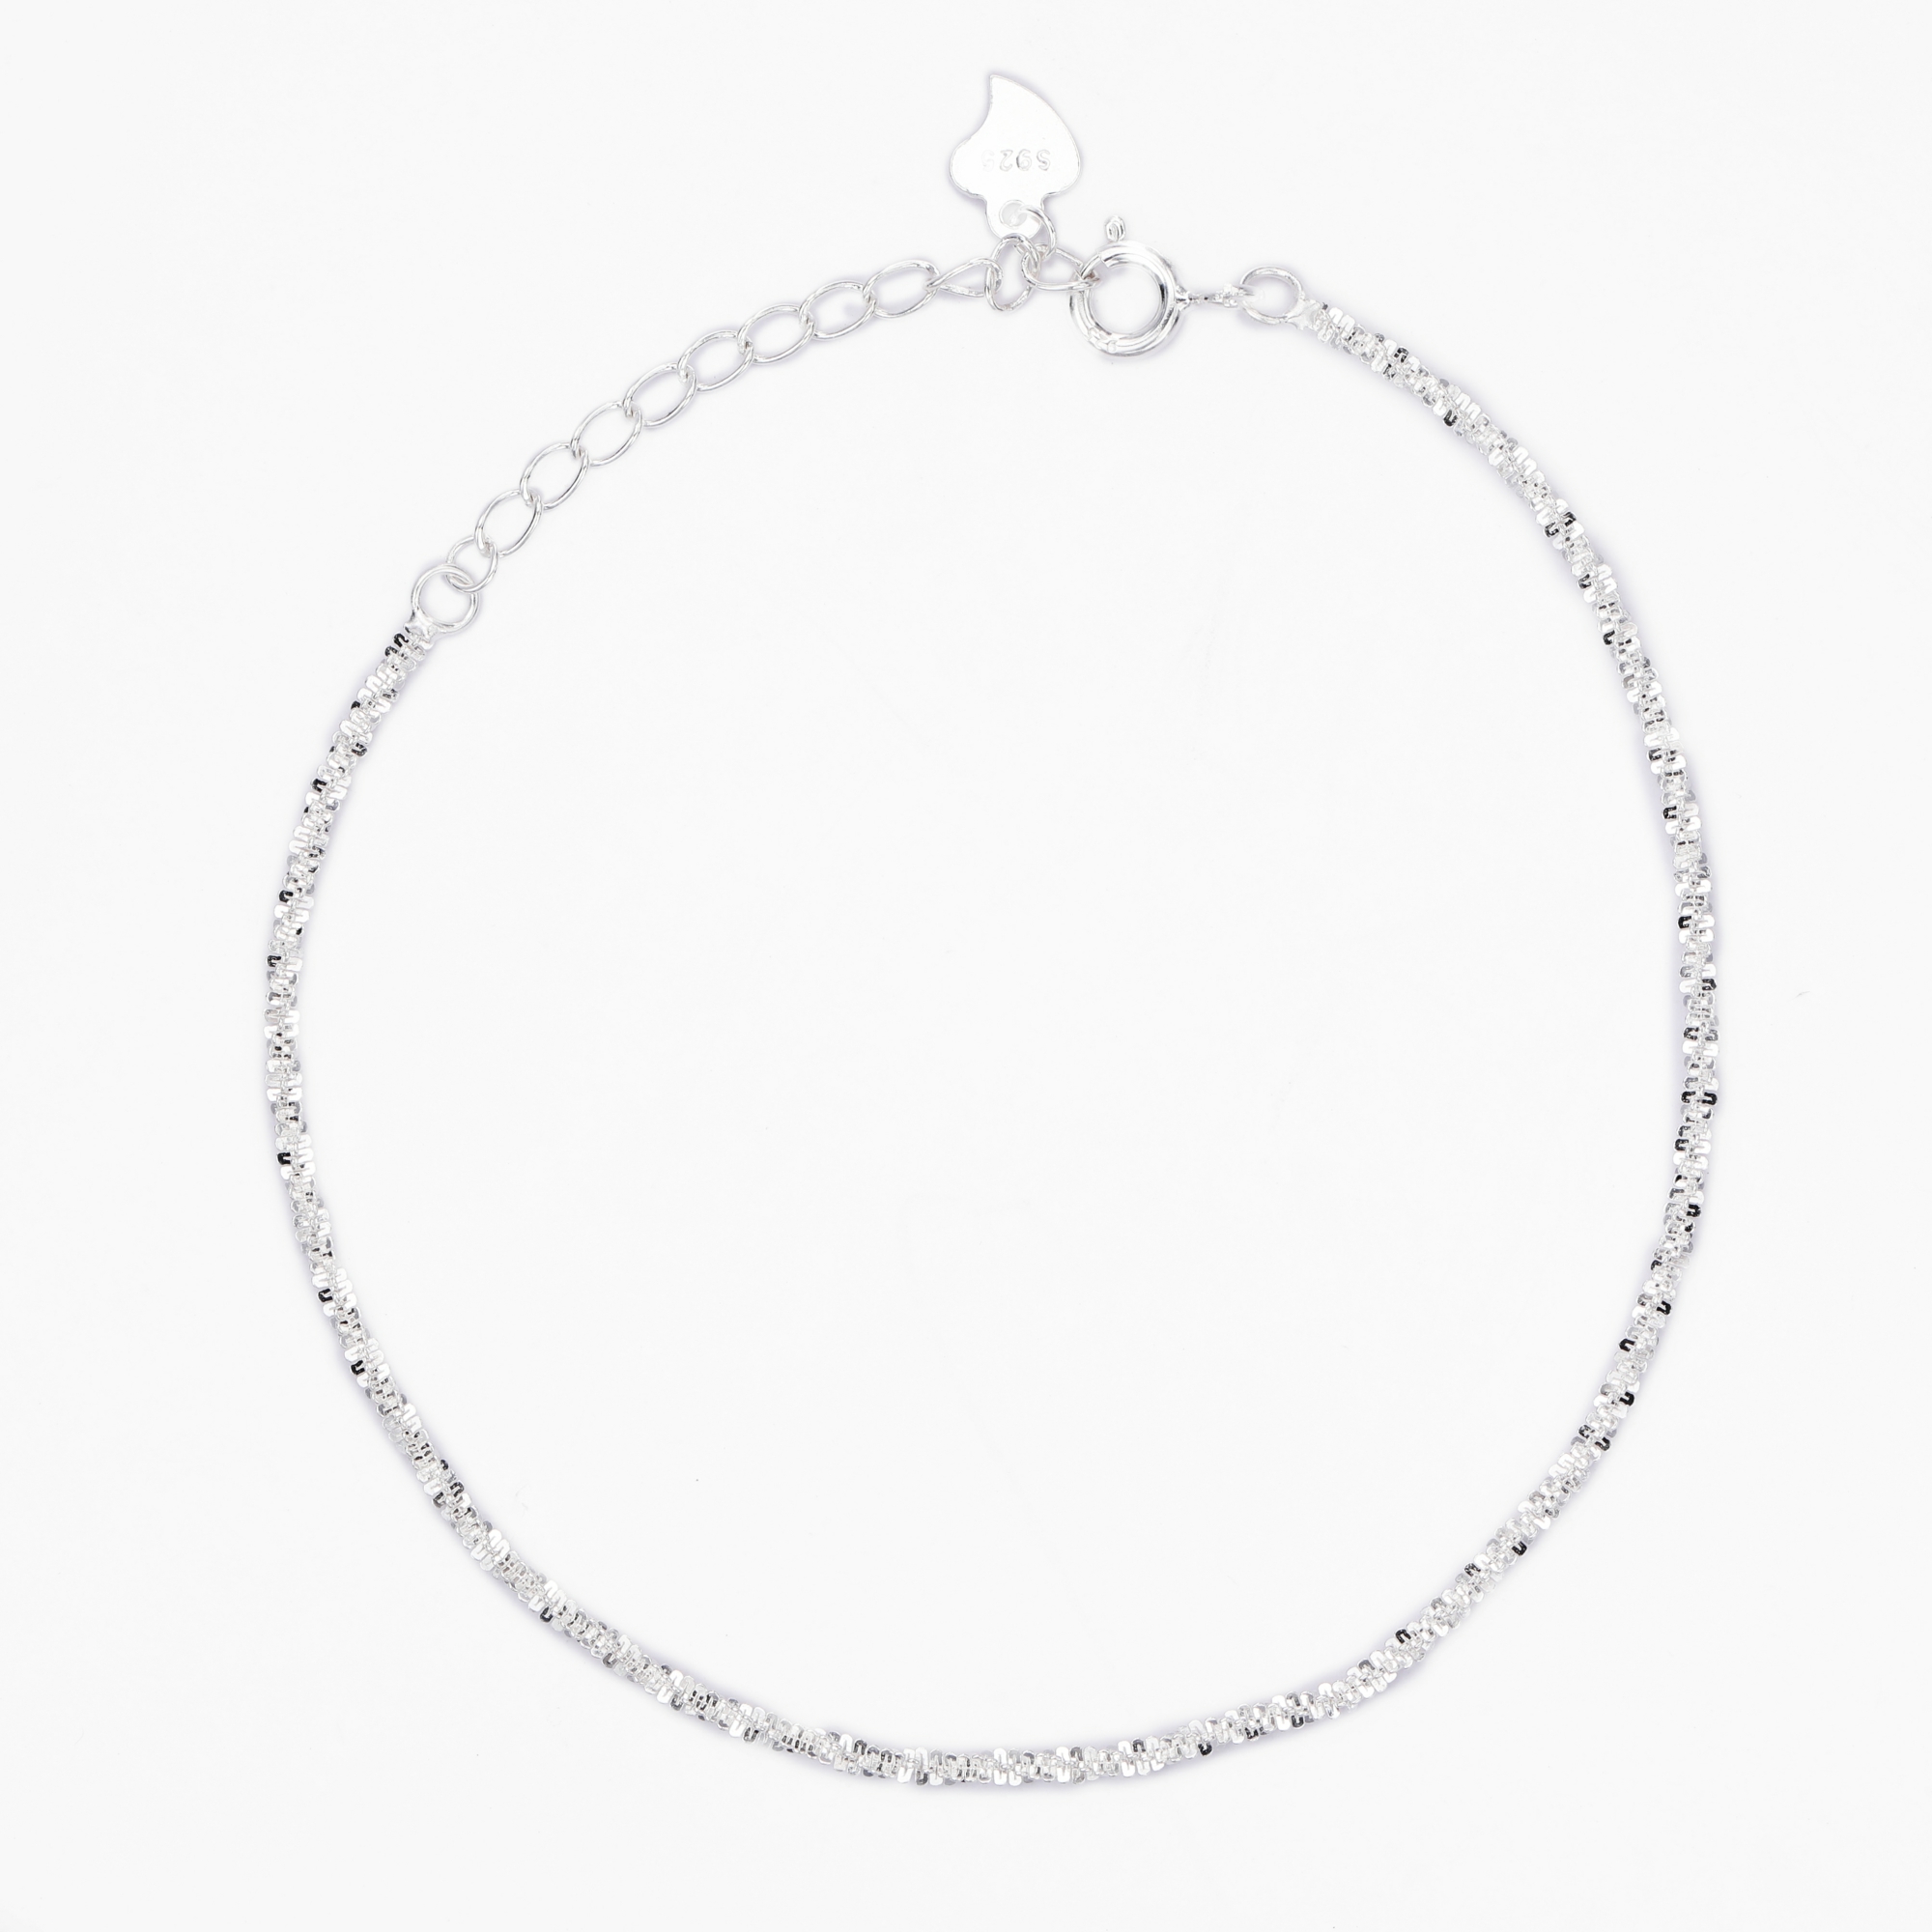 1.5MM Thick Sparkle Twisted Rock Chain Bracelet,Plain Solid 925 Sterling Silver Bracelet Chain 6'' with 1.2'' Extension Chain 1900293 - Click Image to Close